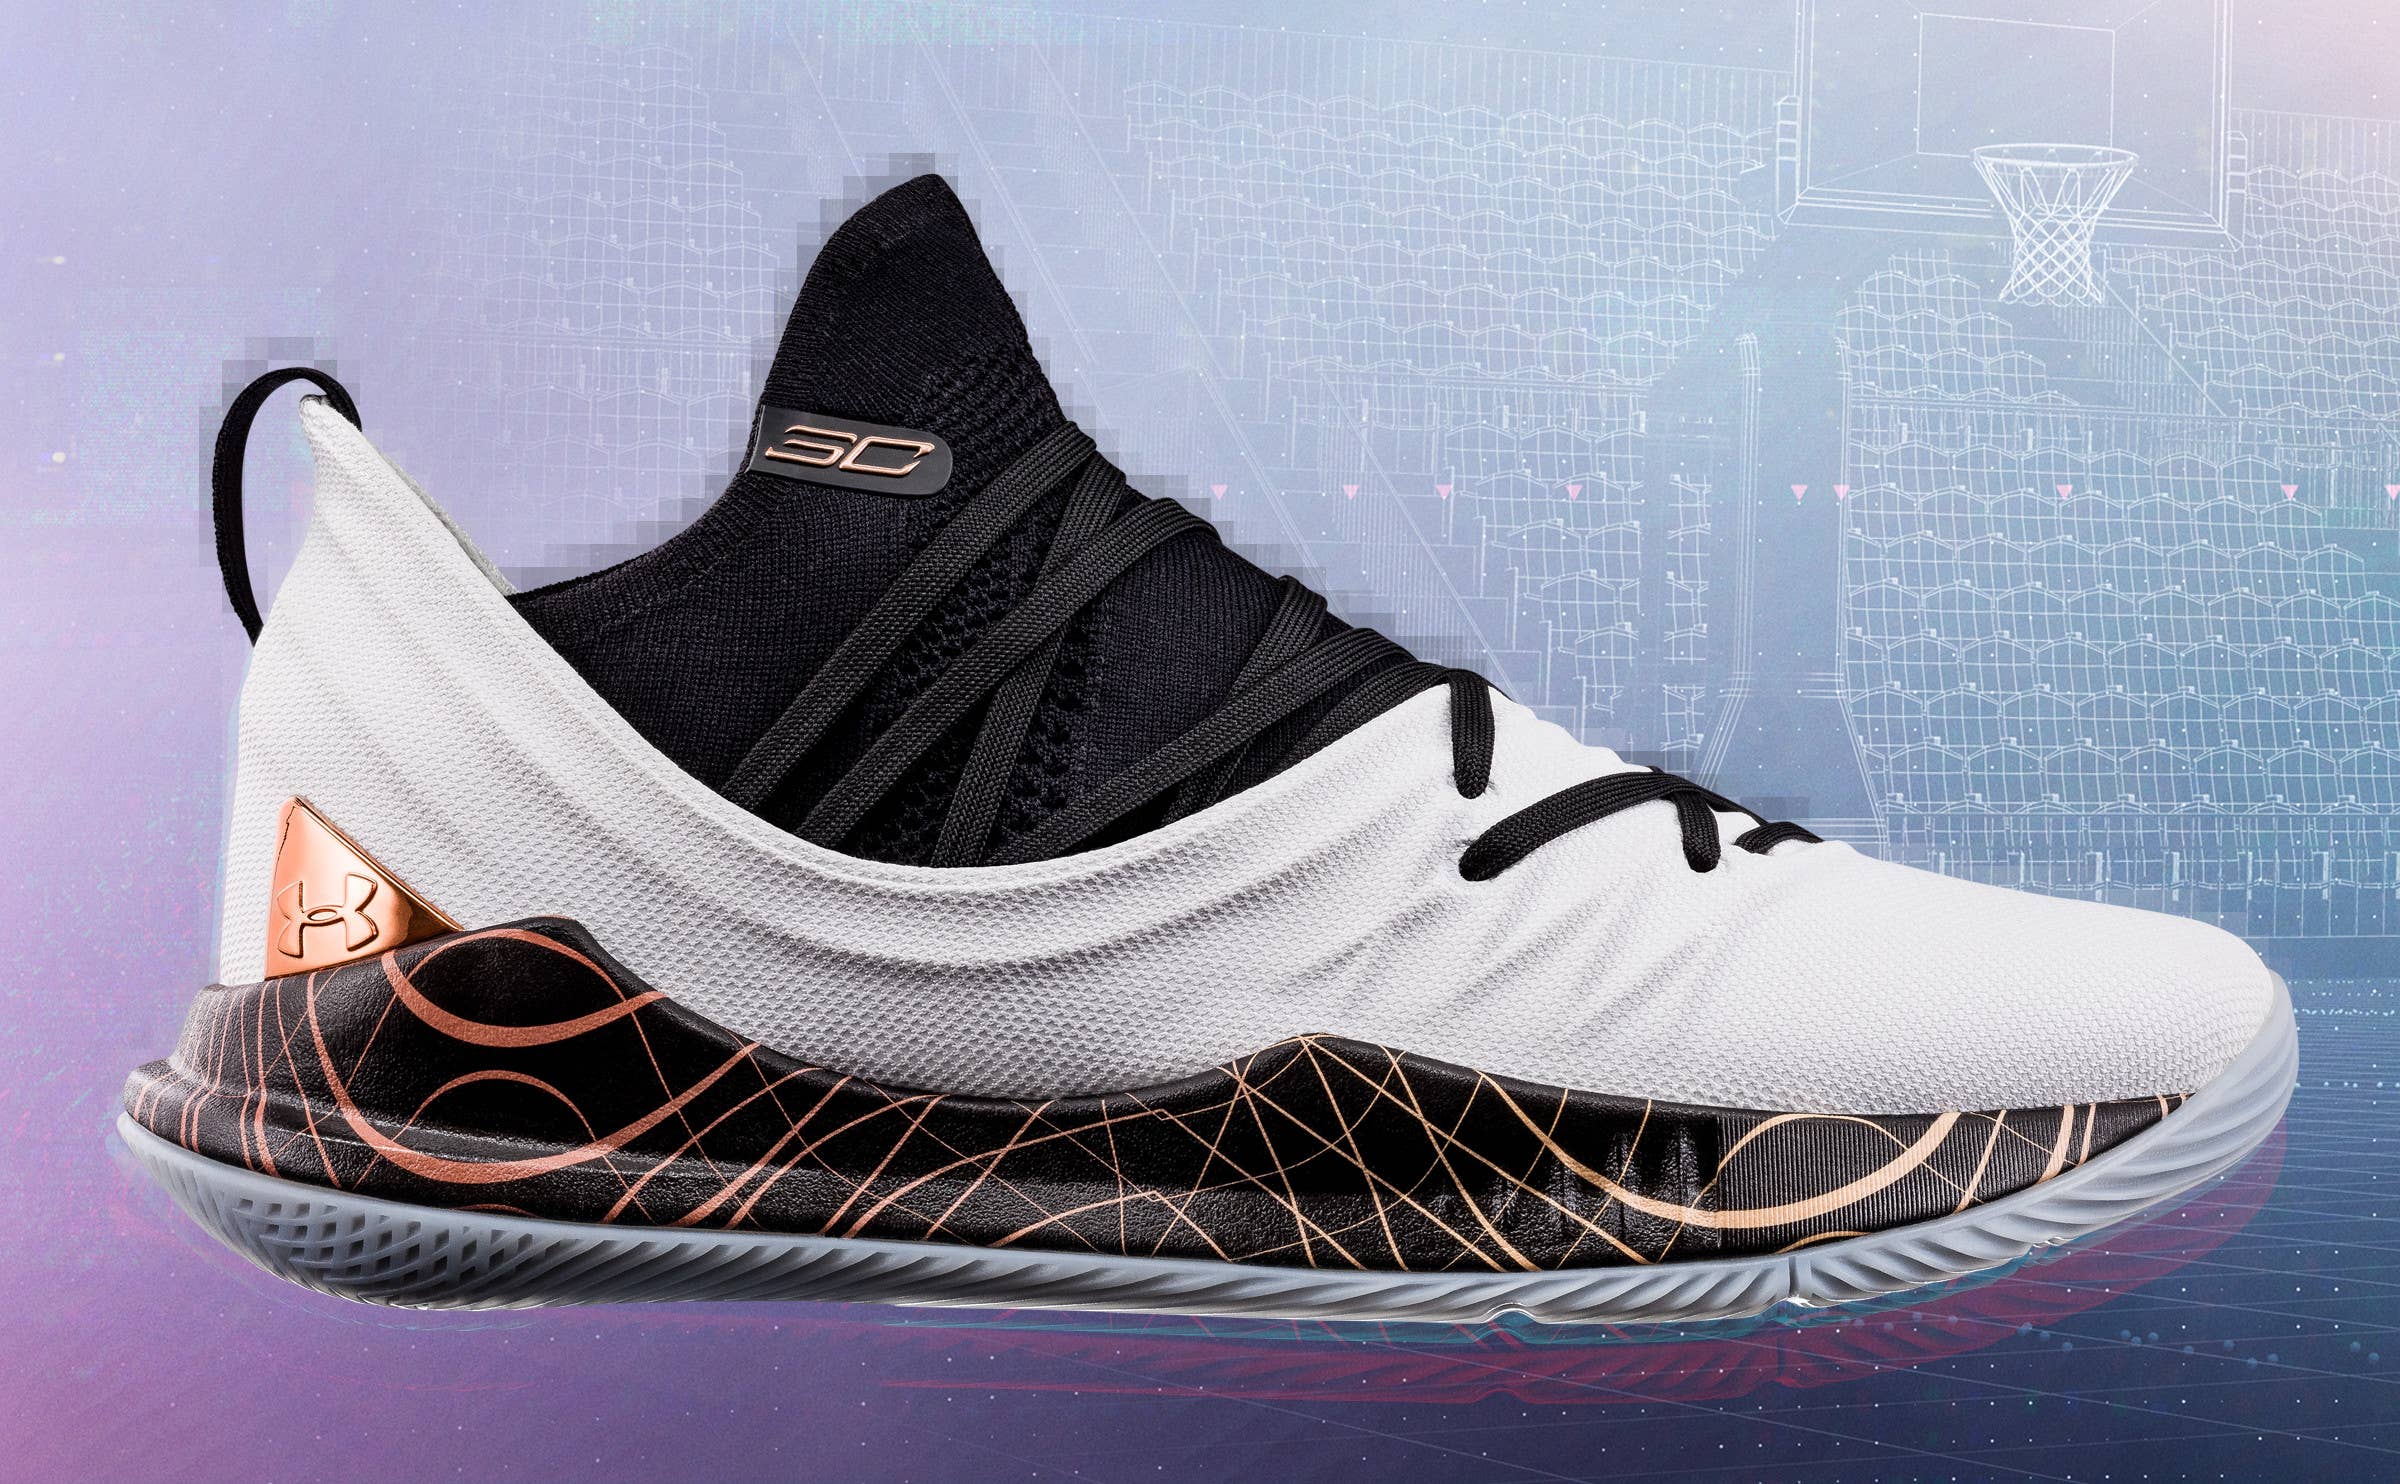 Under Armour Curry 5 'Copper/Black'